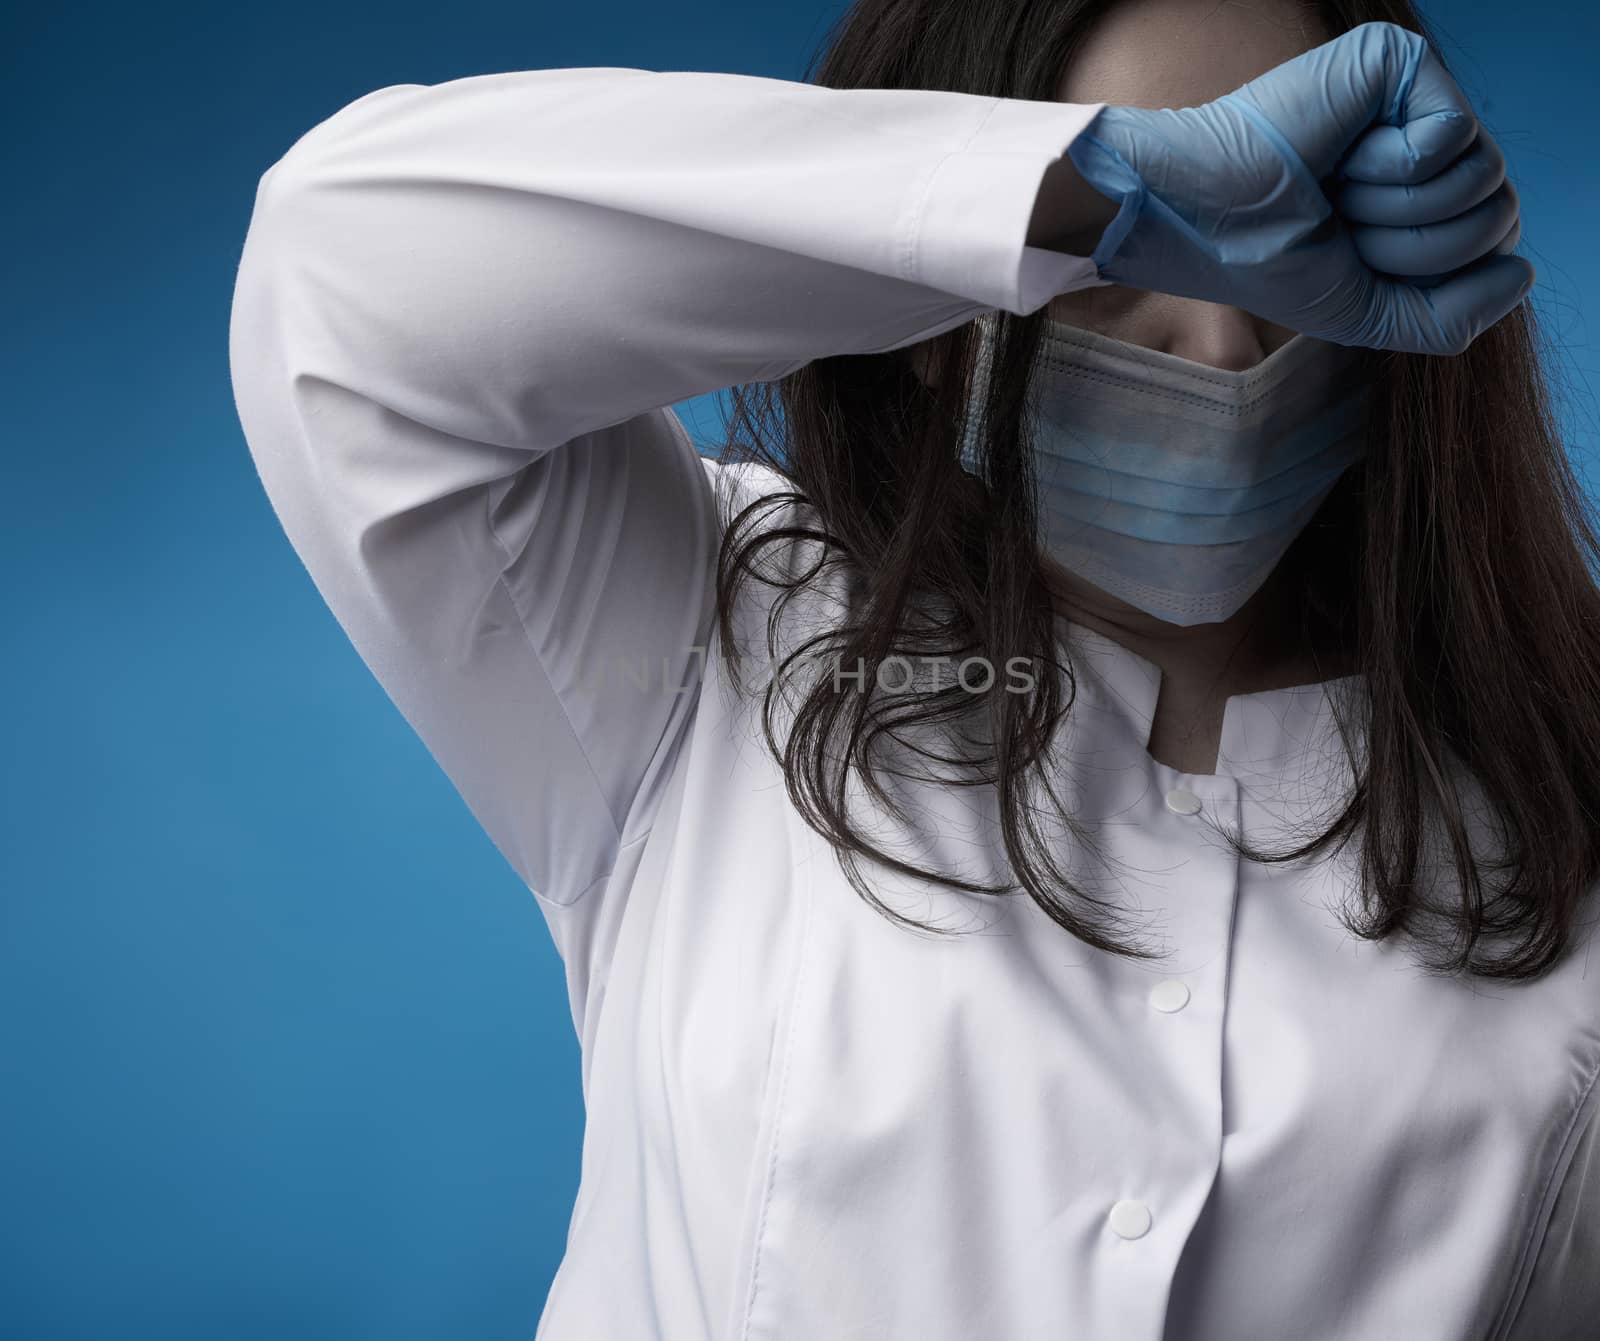 young woman doctor in a white coat, blue latex gloves and a protective mask on his face stands on a blue background. Hand pressed to forehead, concept of fatigue and hopelessness.